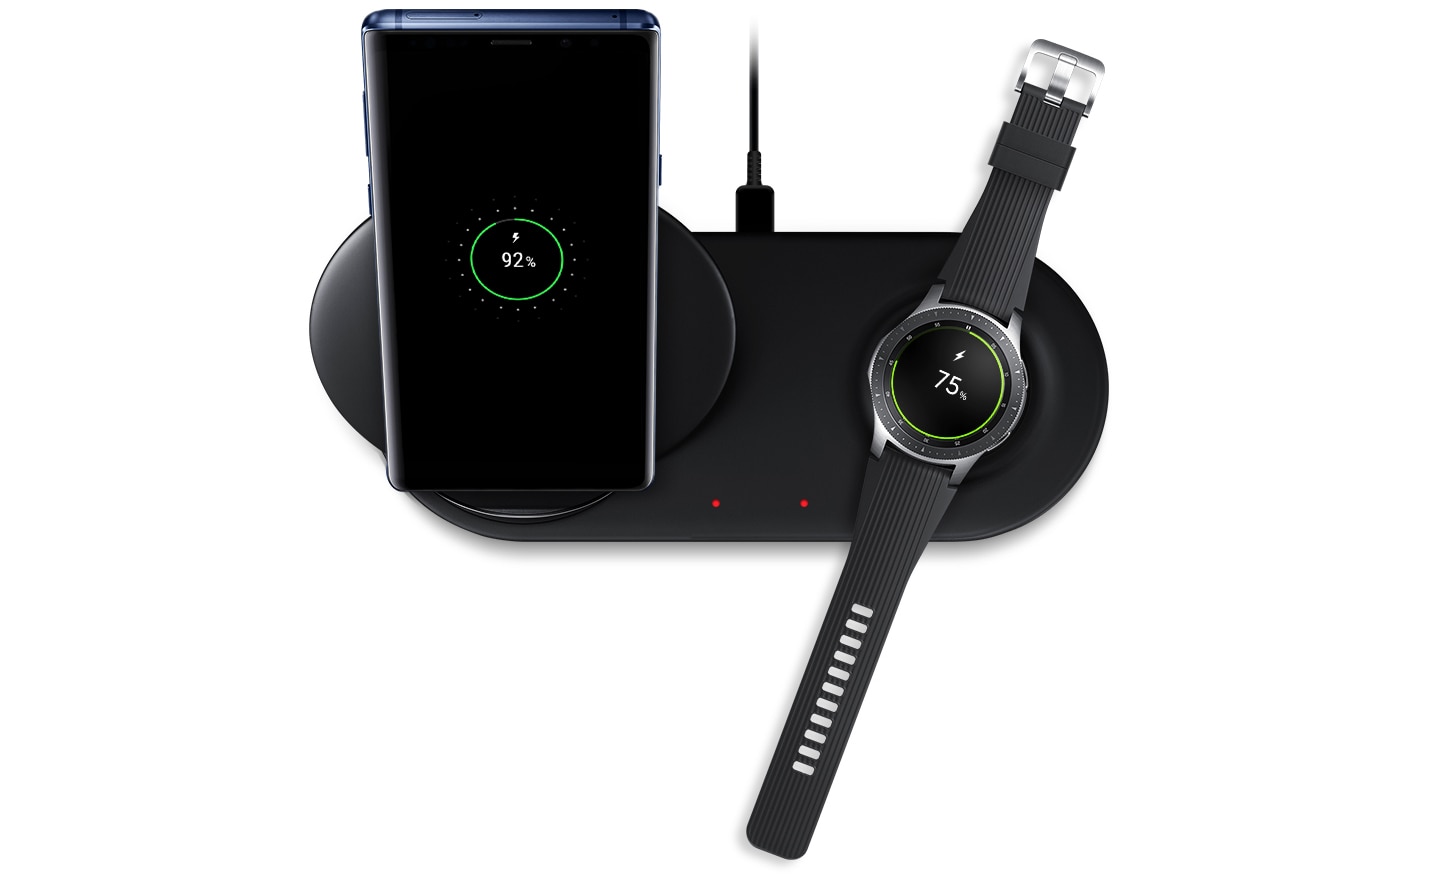 Wireless Charger Duo, Black Mobile Accessories - EP-N6100TBEGUS | Samsung US